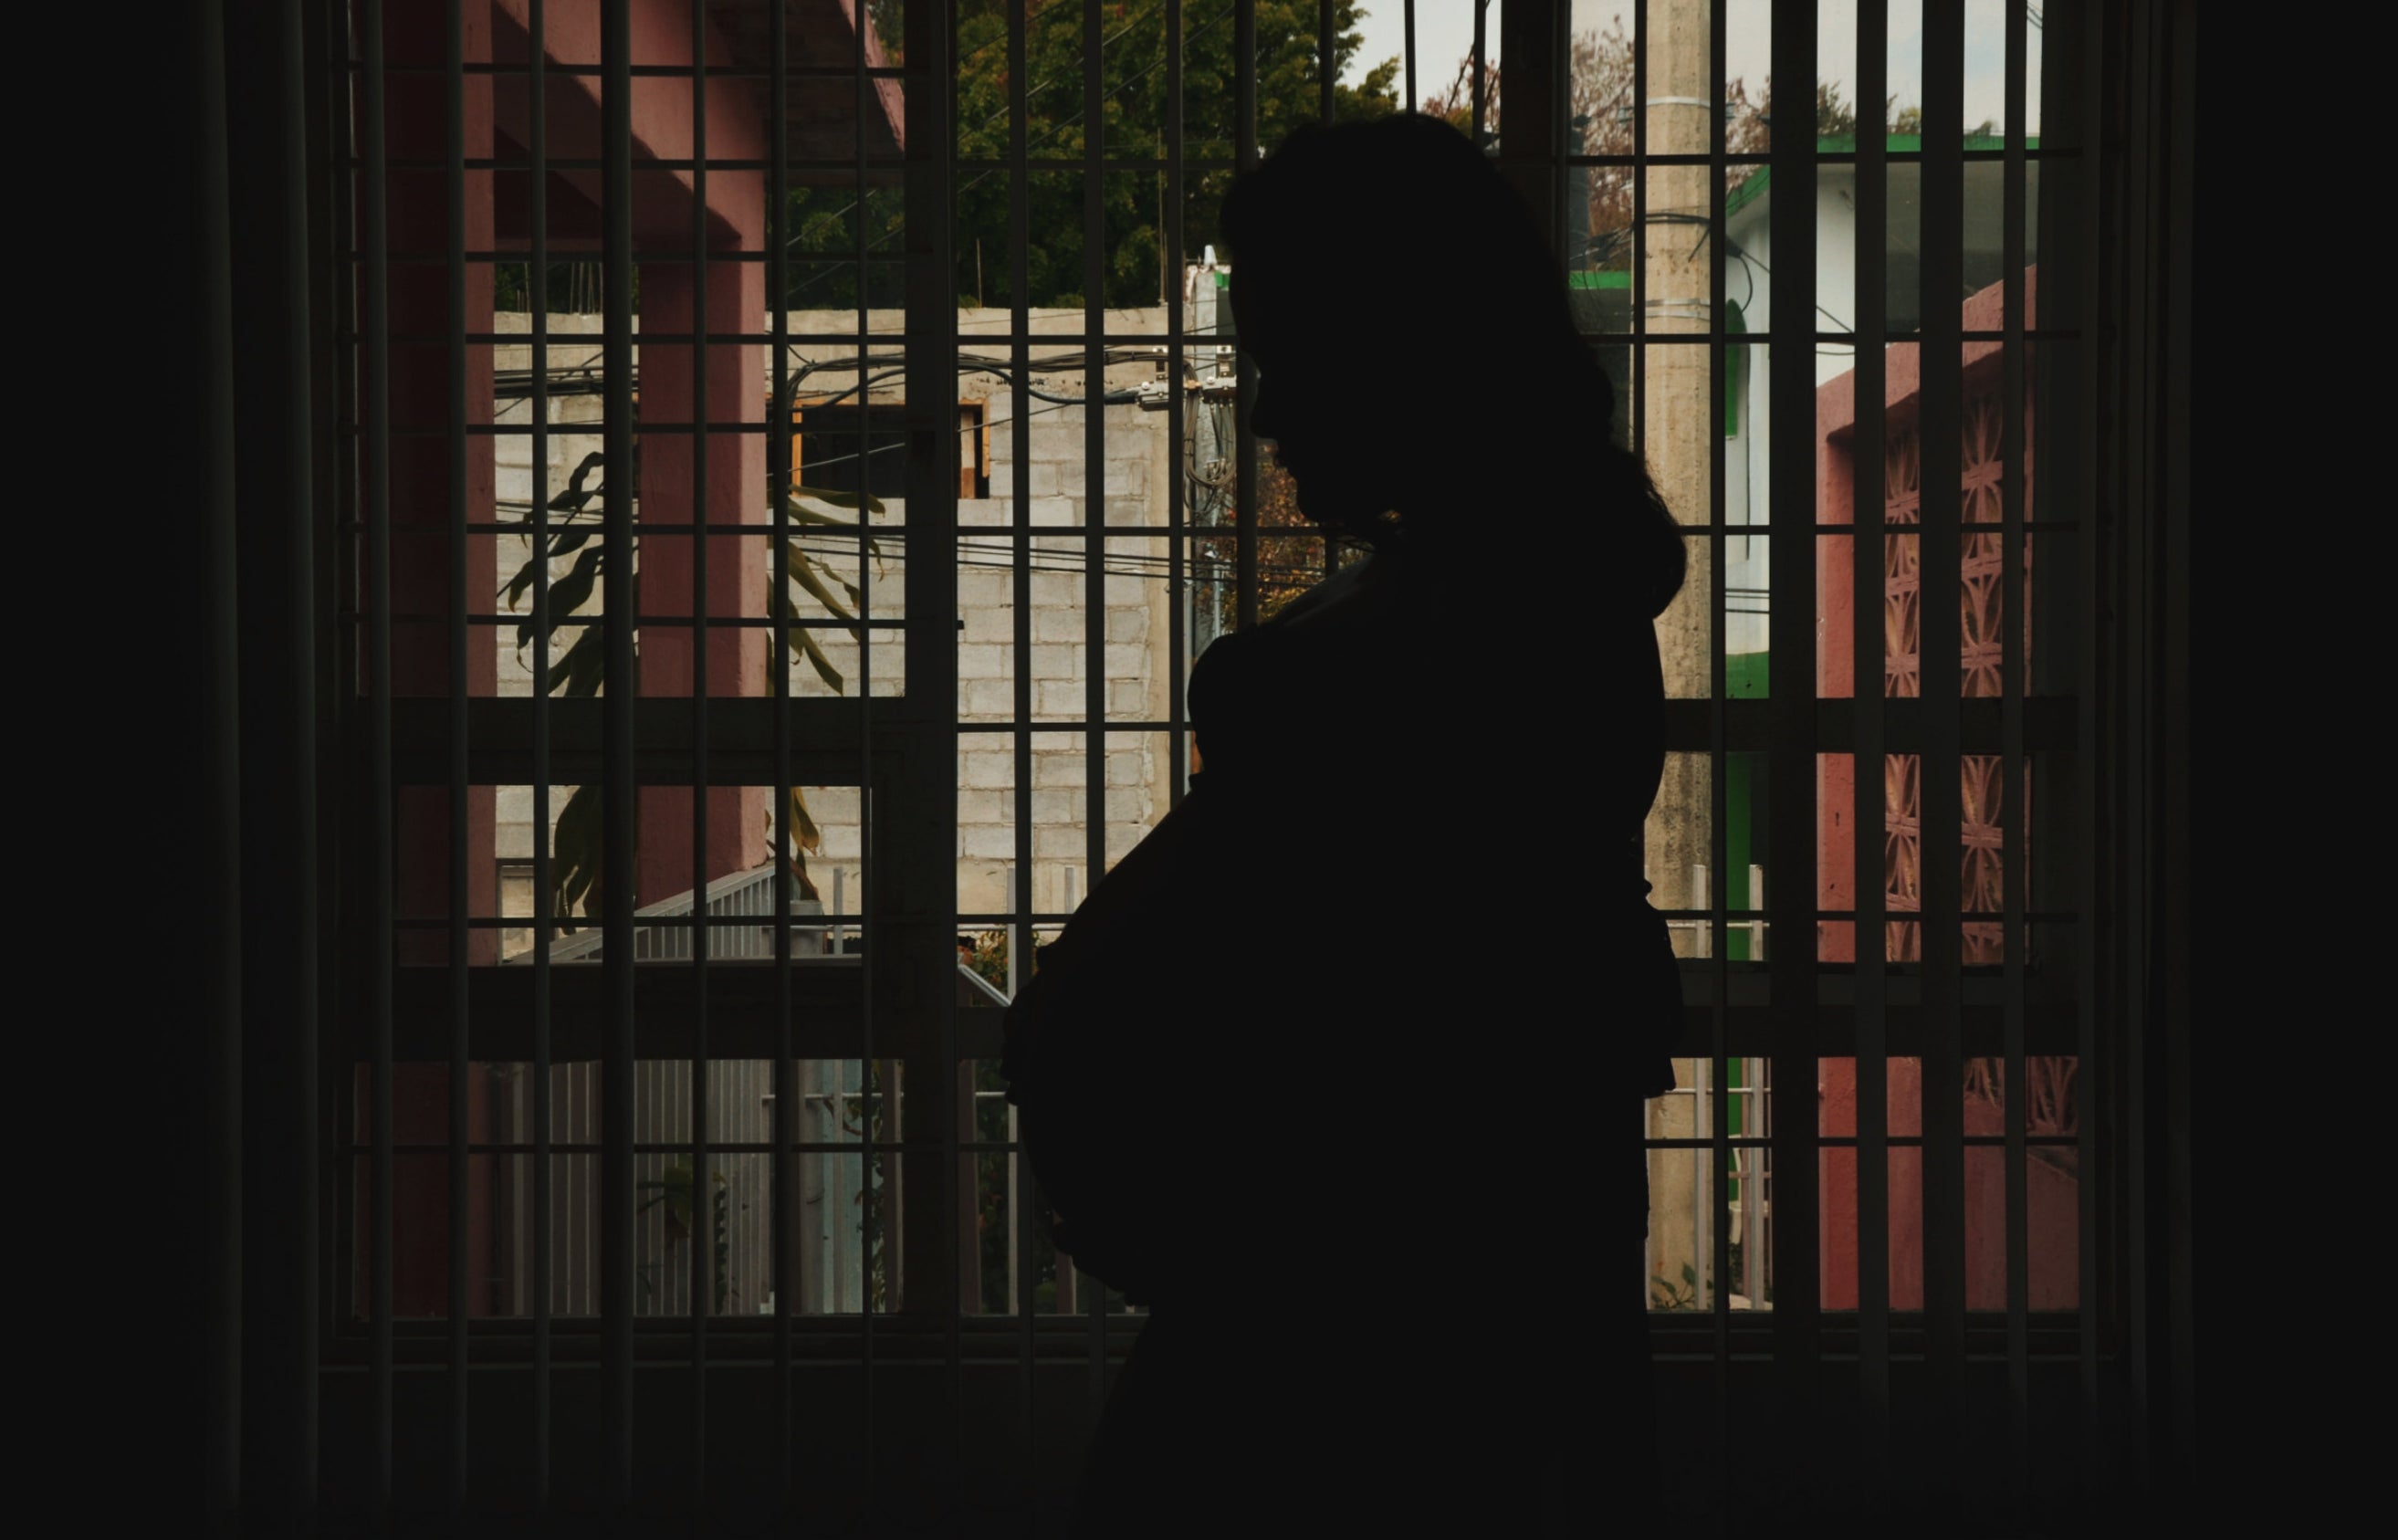 A pregnant person in jail